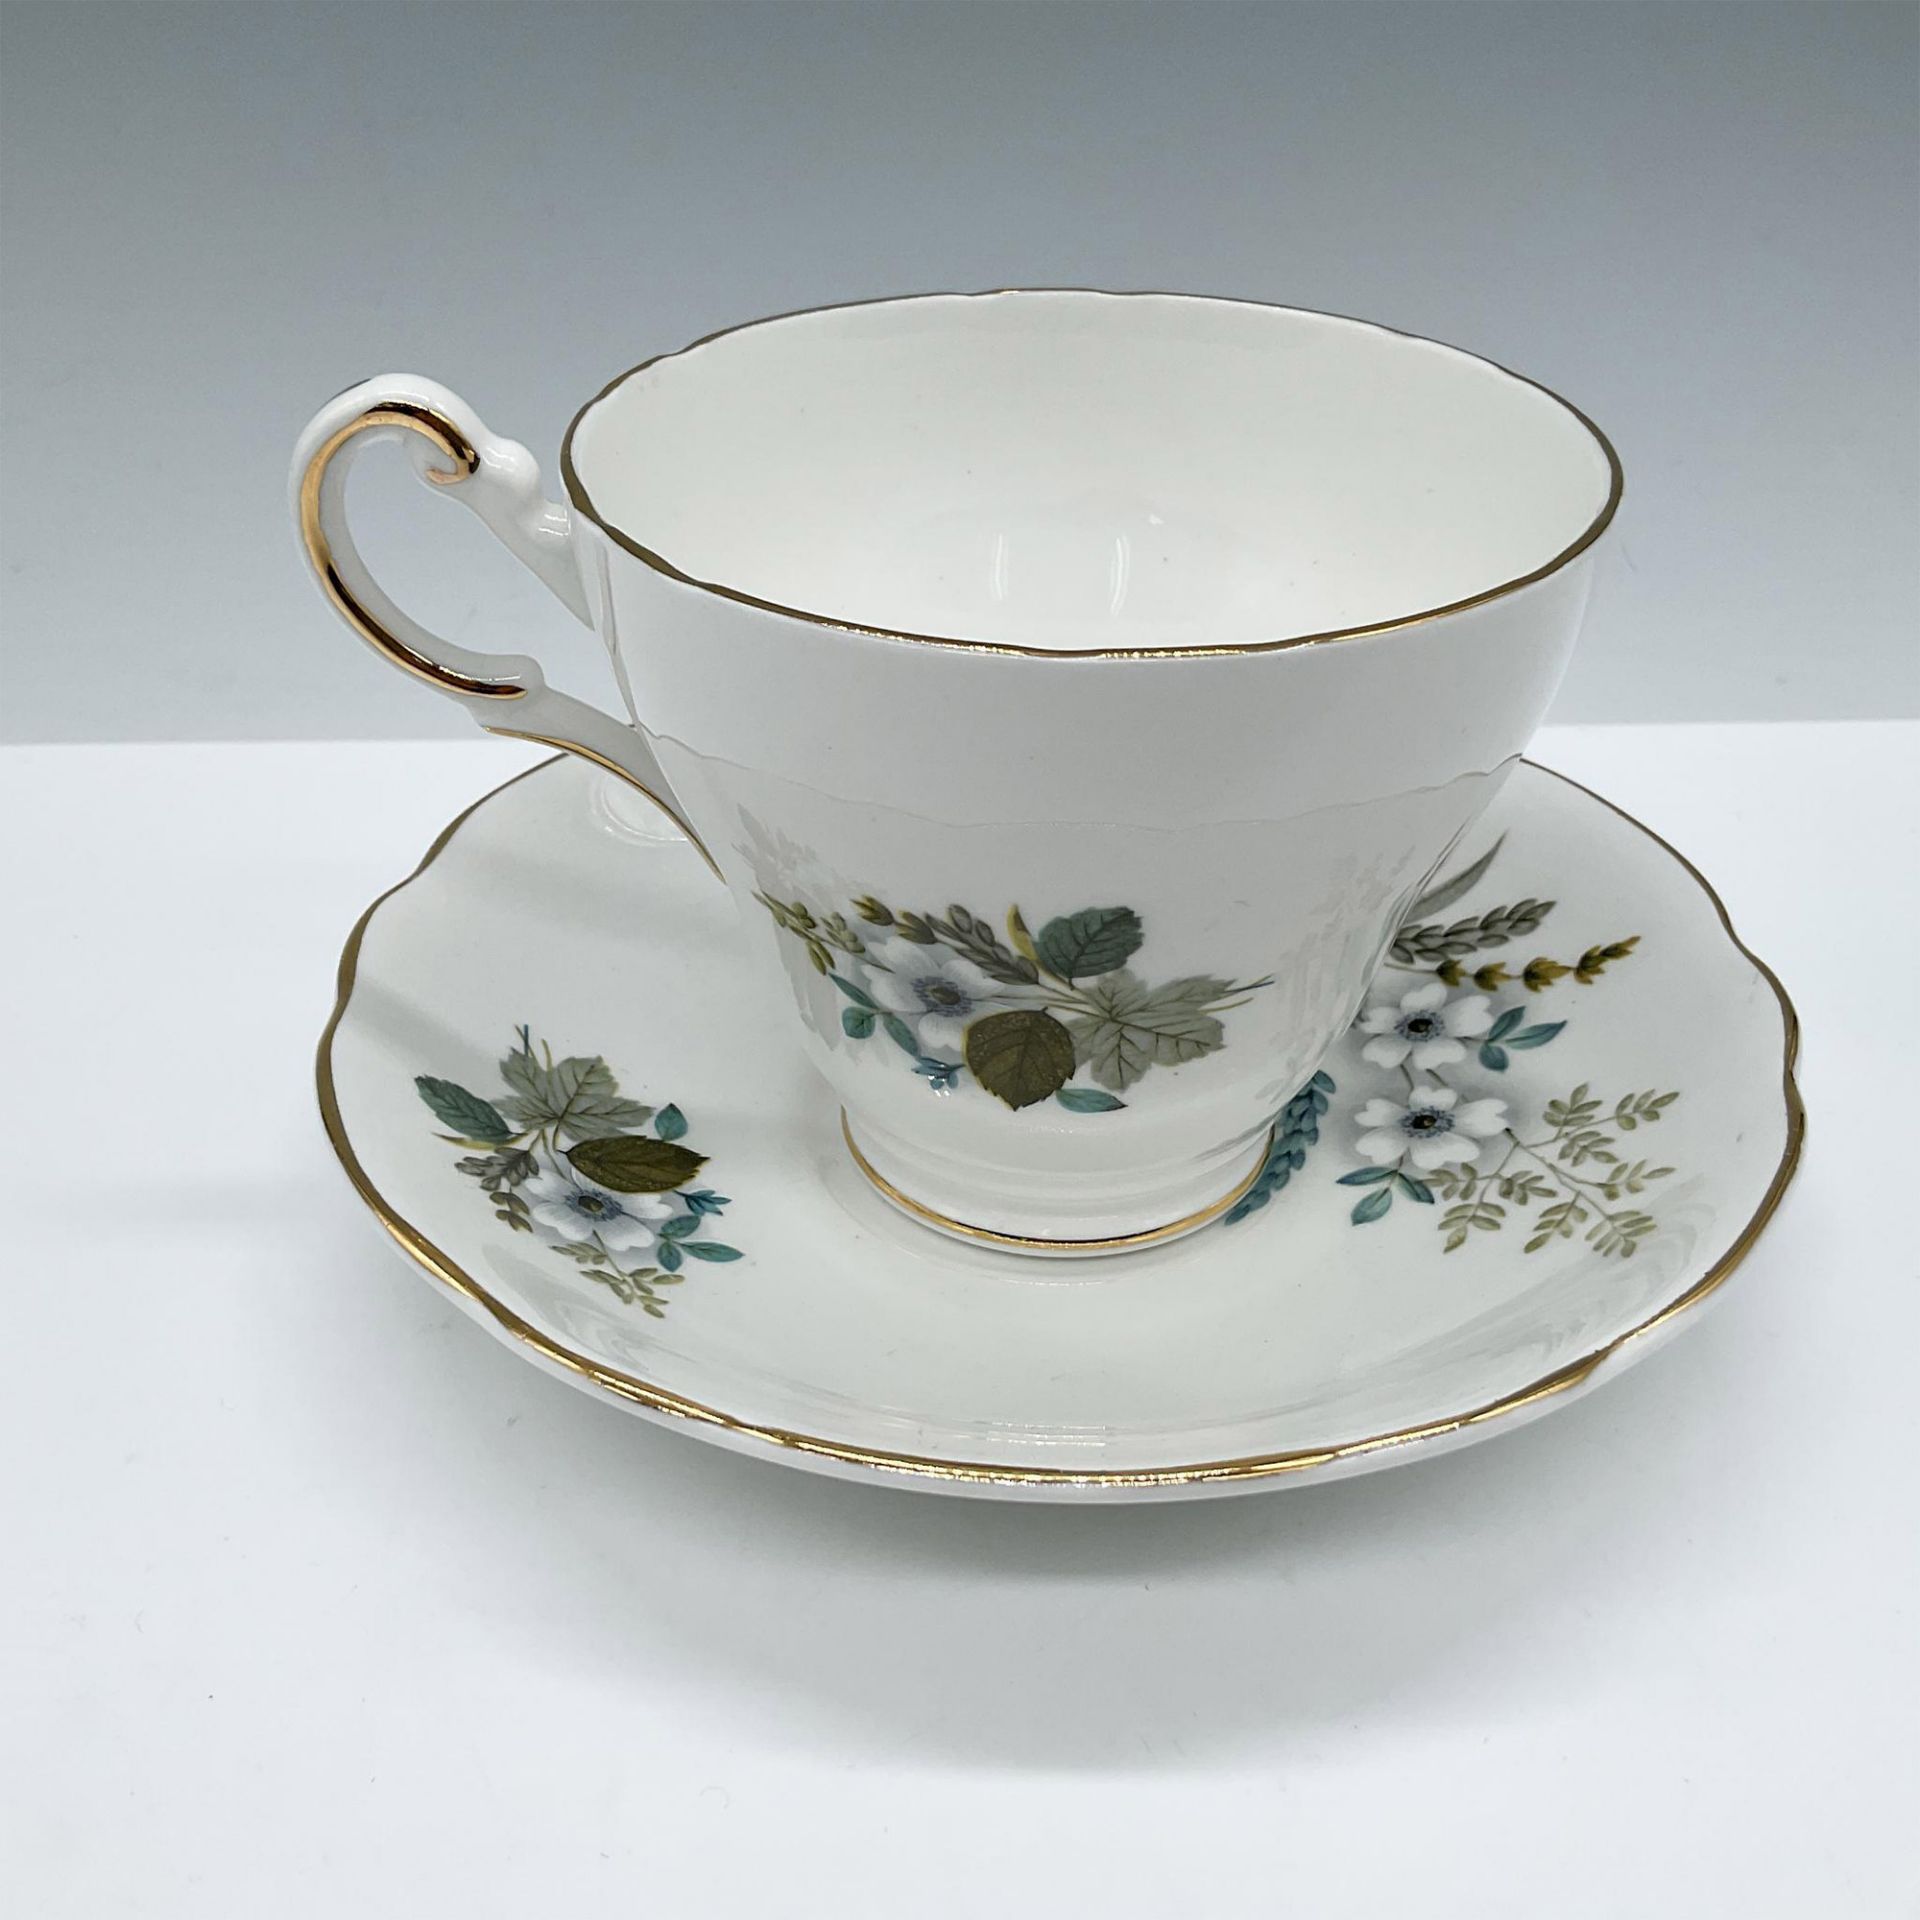 Regency Bone China Tea Cup and Saucer - Image 2 of 4